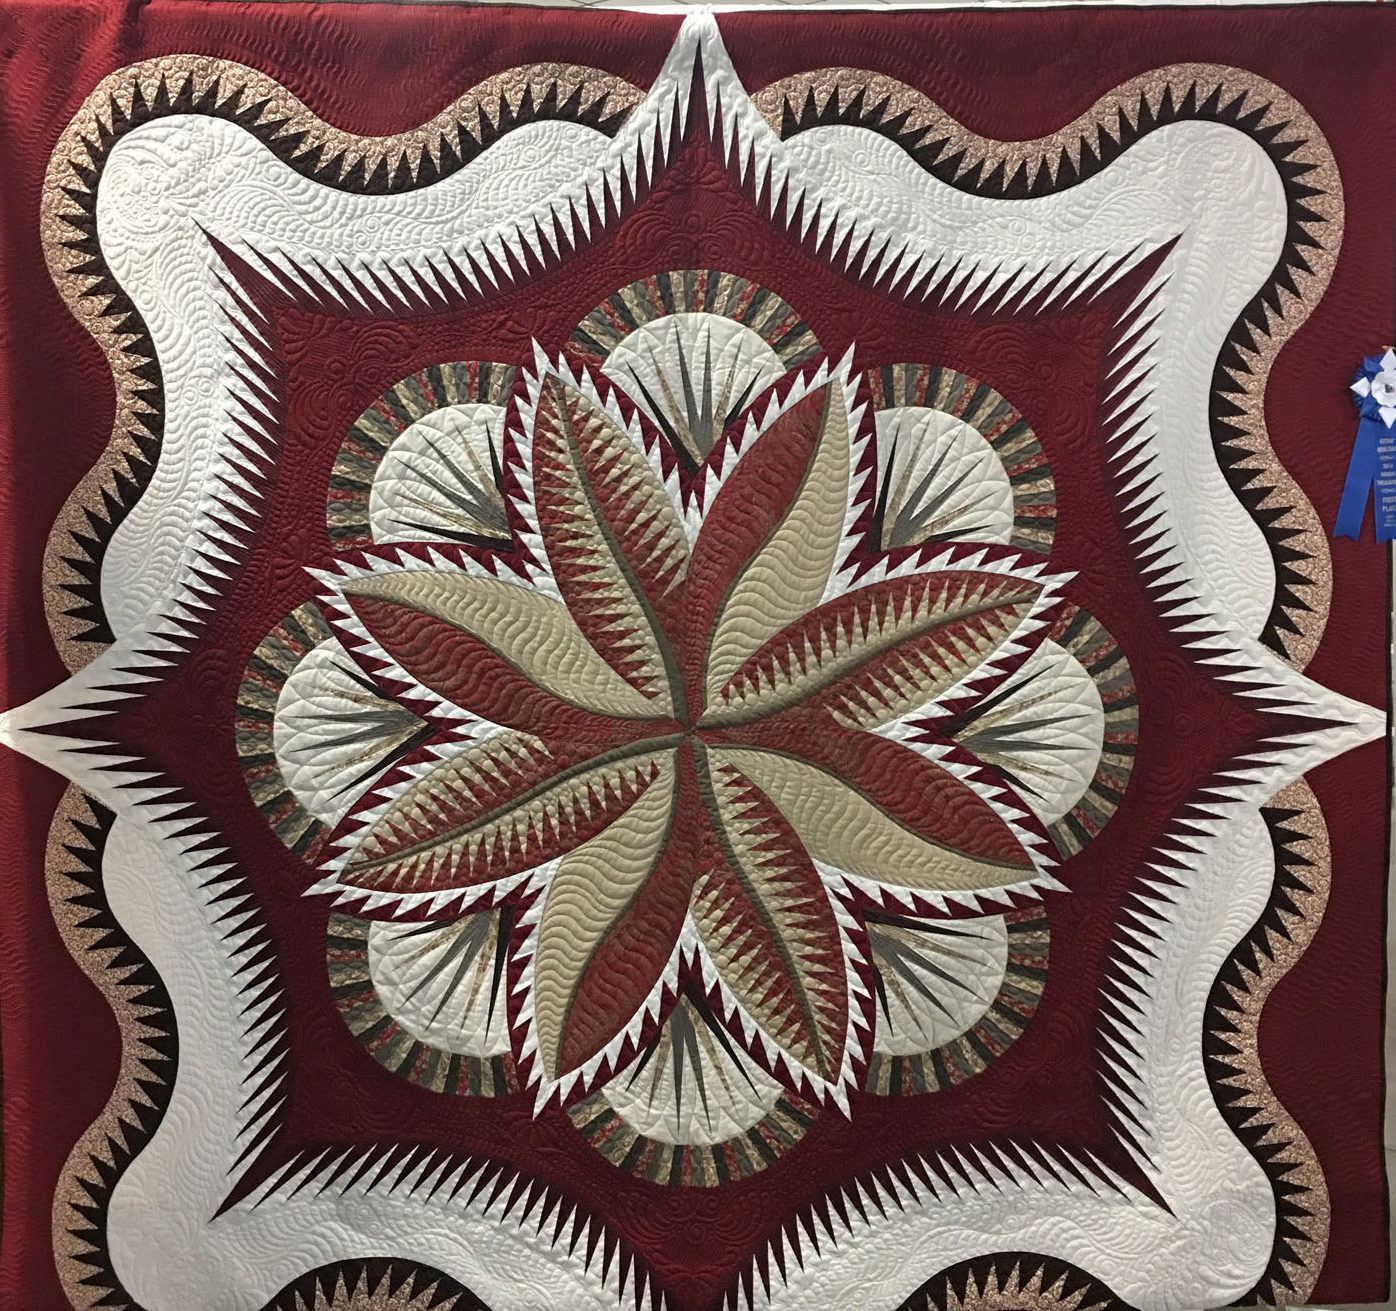 108 “Tumble” made and quilted by Pam Knight, 1st Place Winner Large Individual Quilt, Kitsap Quilt Show 2018